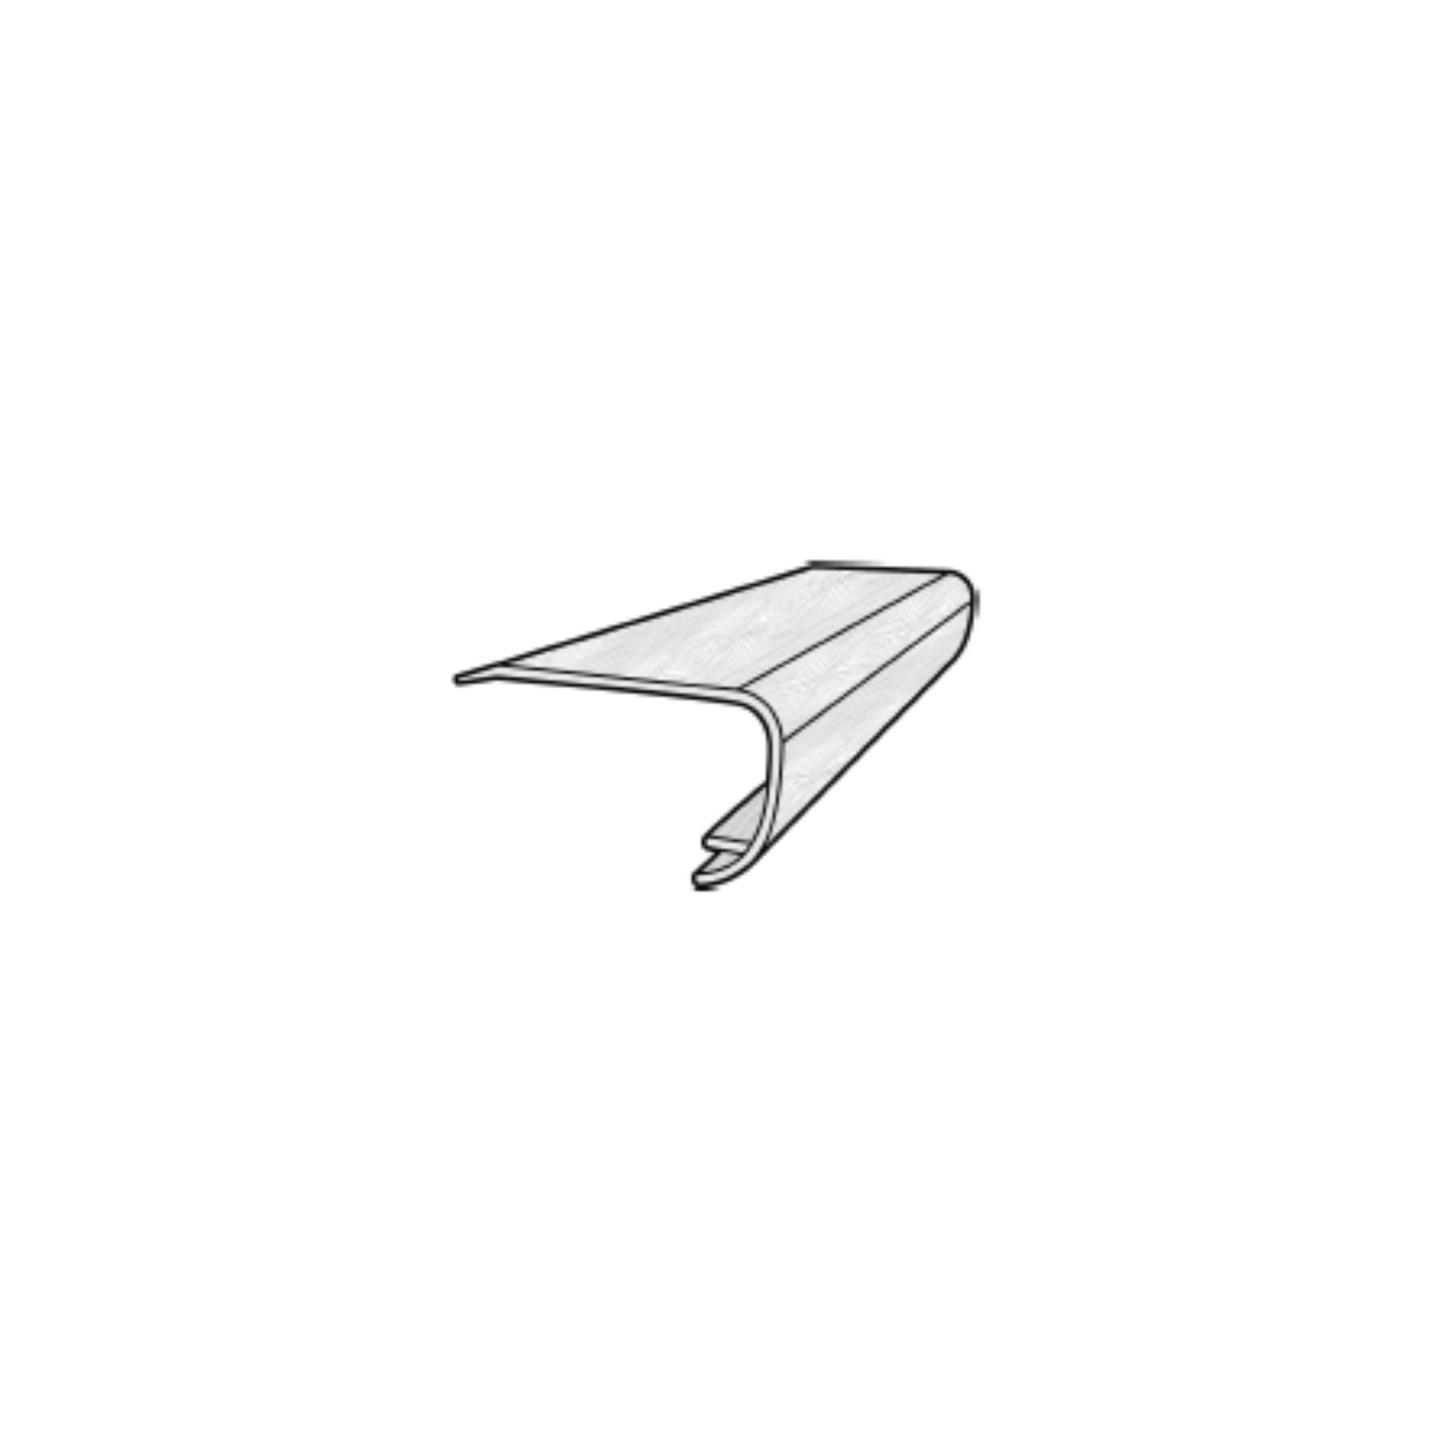 Accessory MSI - Cyrus - Whitfield Gray - Overlap Stair Nose MSI